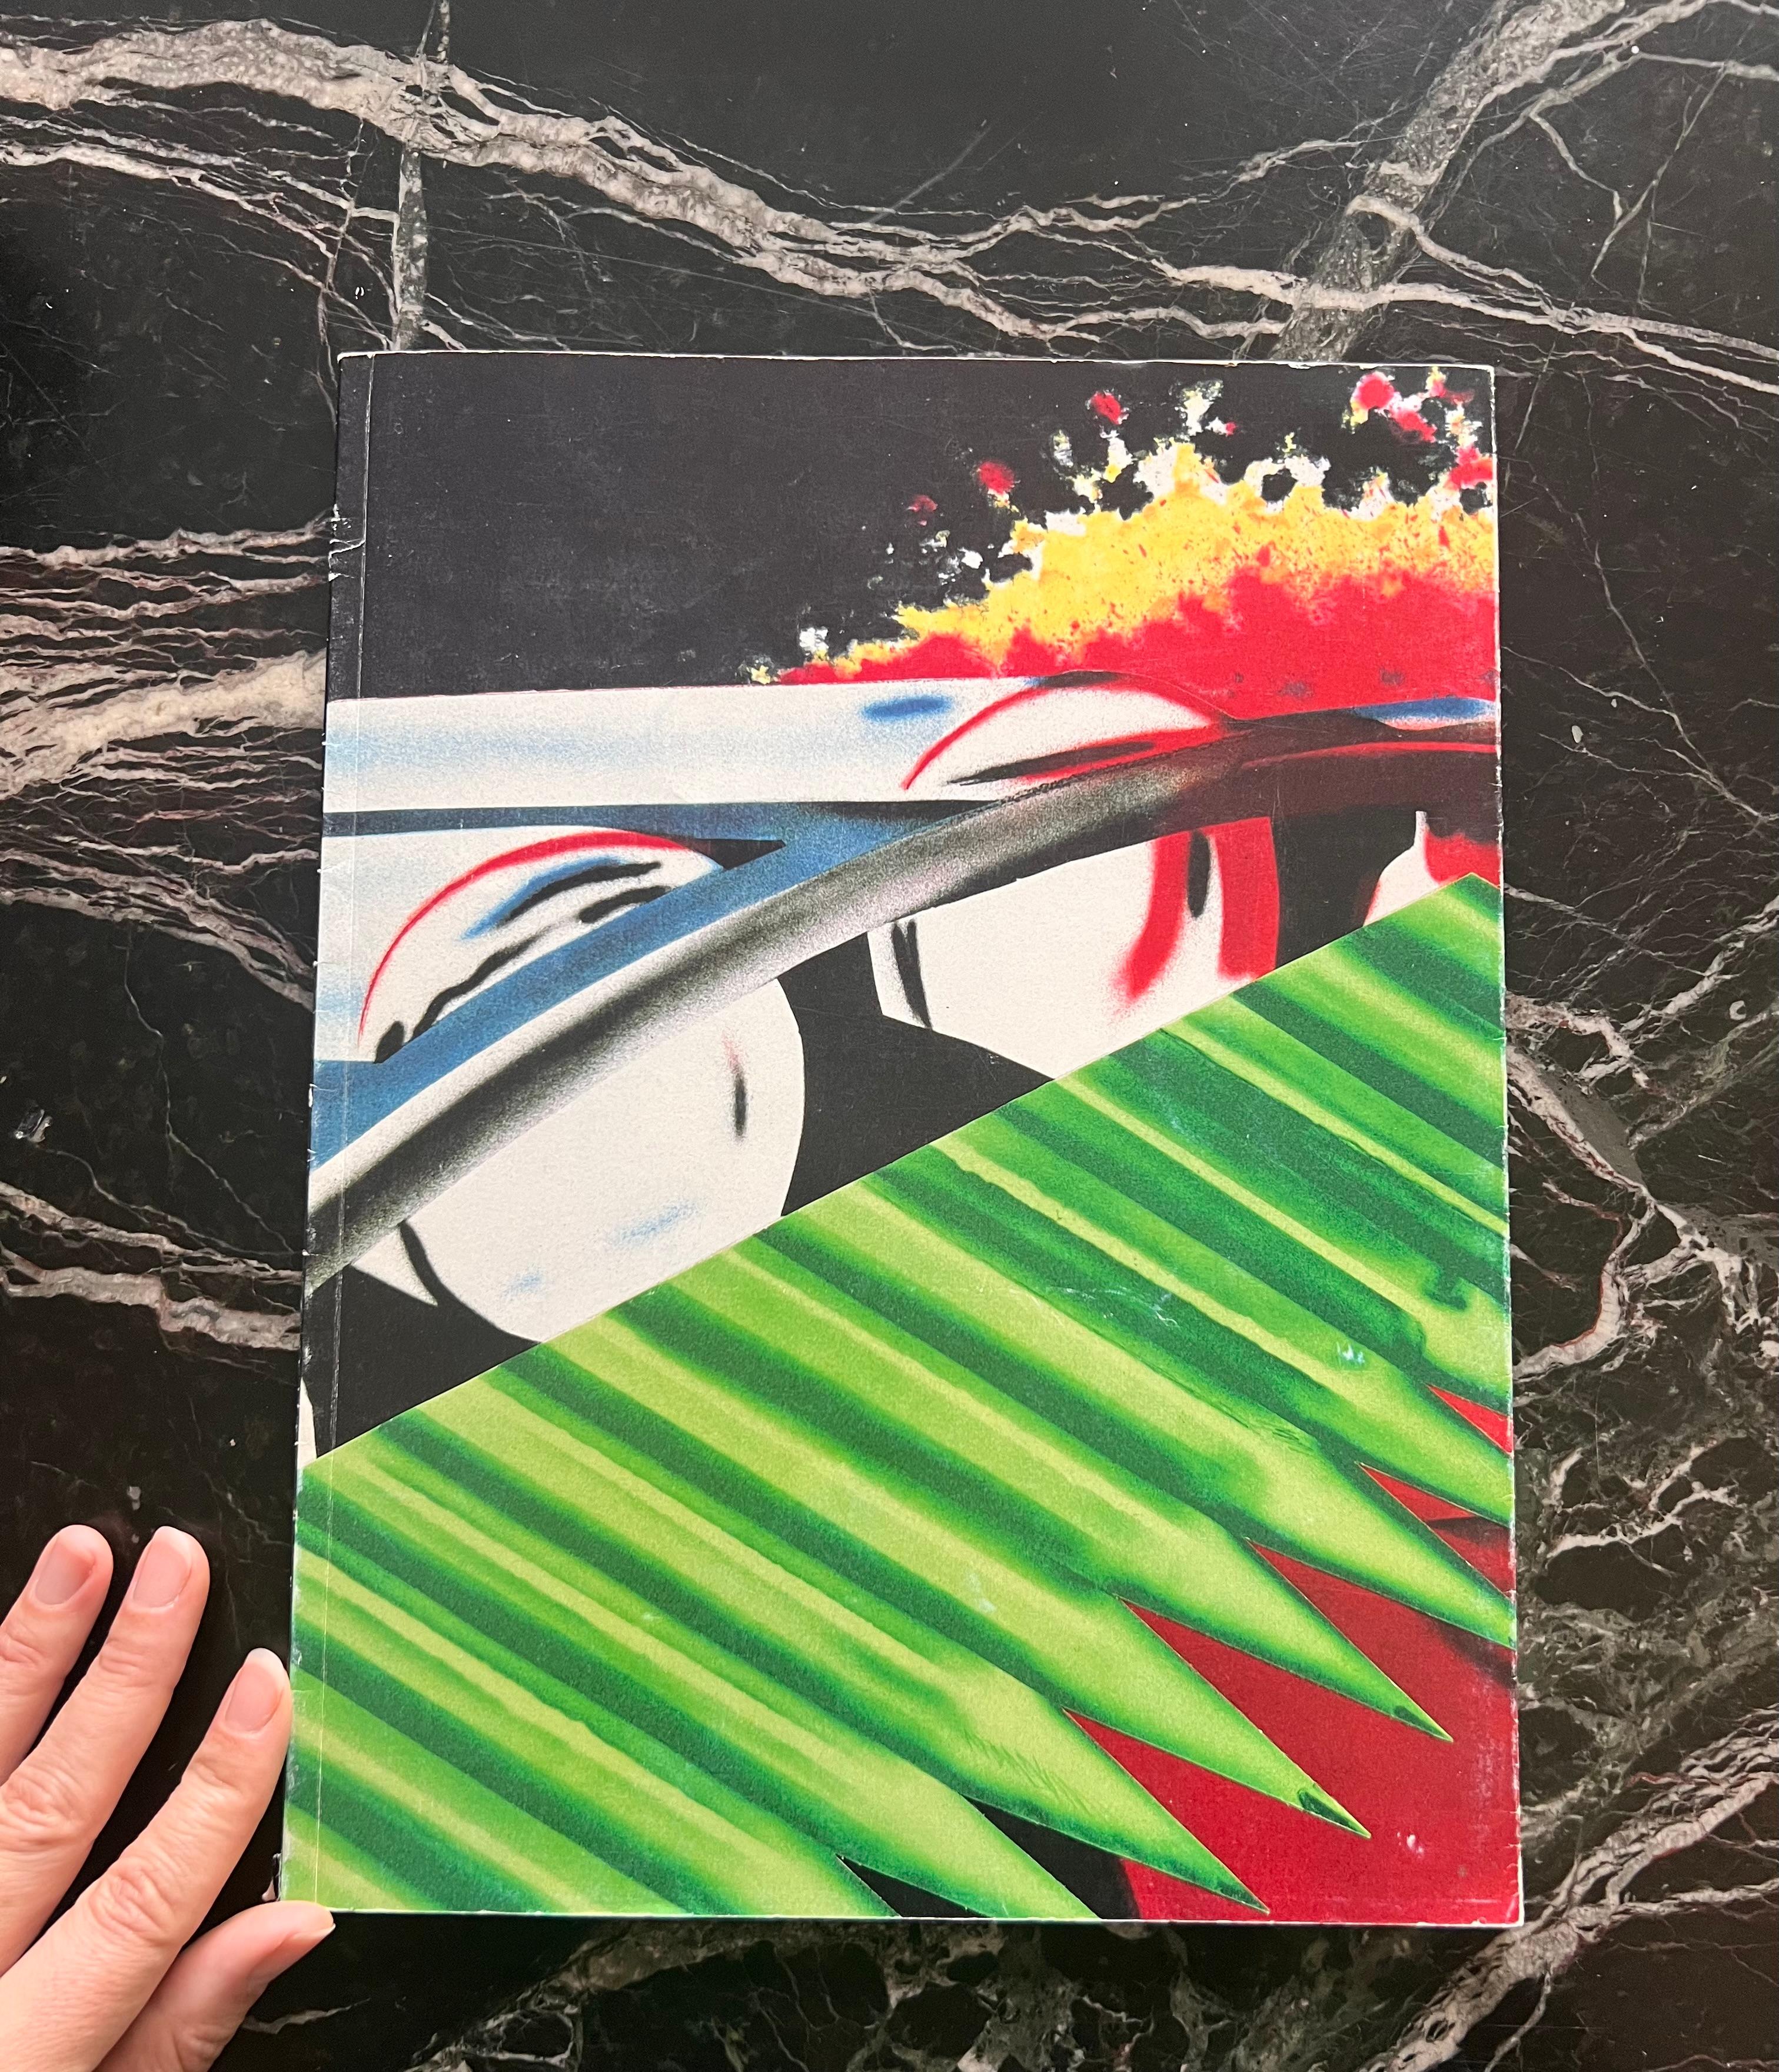 A vintage original edition coffee table book James Rosenquist “Welcome to the Water Planet and House of Fire” 1988-1989, Tyler Graphics Ltd. With essay by Judith Goldman. Color plates. Softcover.
Good condition with minor signs of age. 